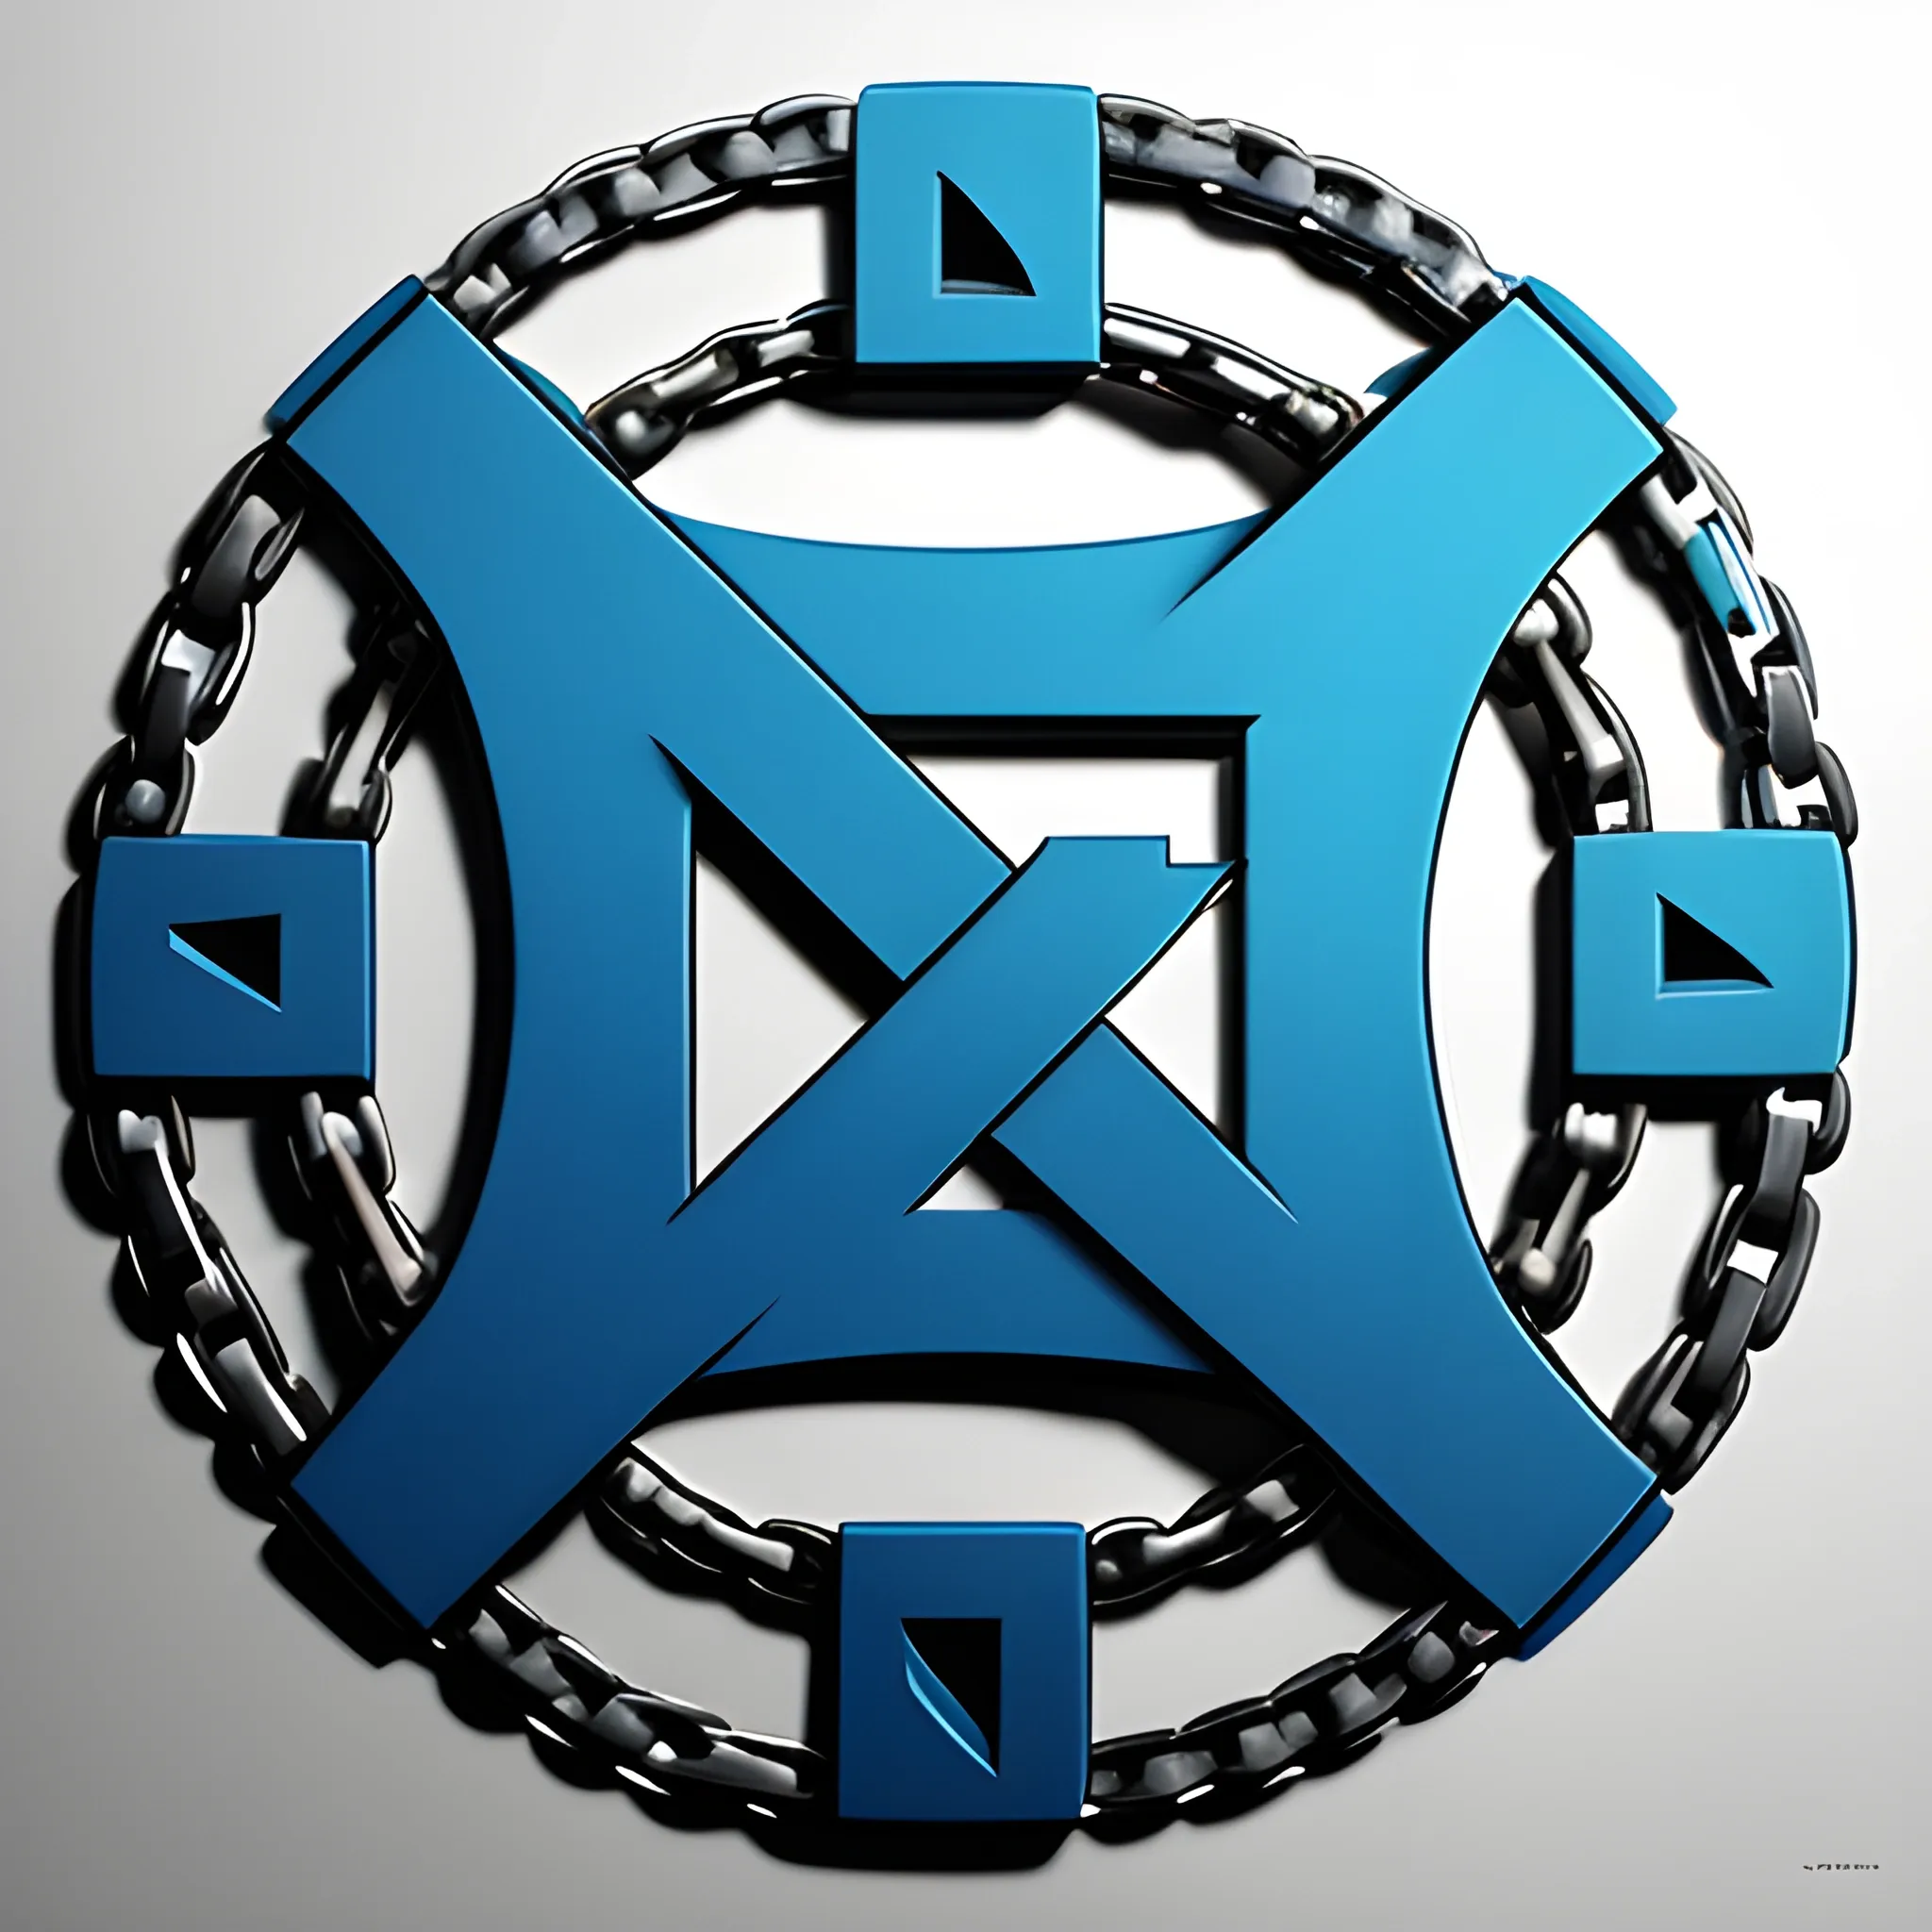 Create a logo for a twitter account  bold and dynamic. Incorporate an element that symbolizes oppression, such as a heavy chain, clenched fists, or a weighty ball and chain. Ensure the overall design evokes a sense of resistance and humor. , more blue color 3D